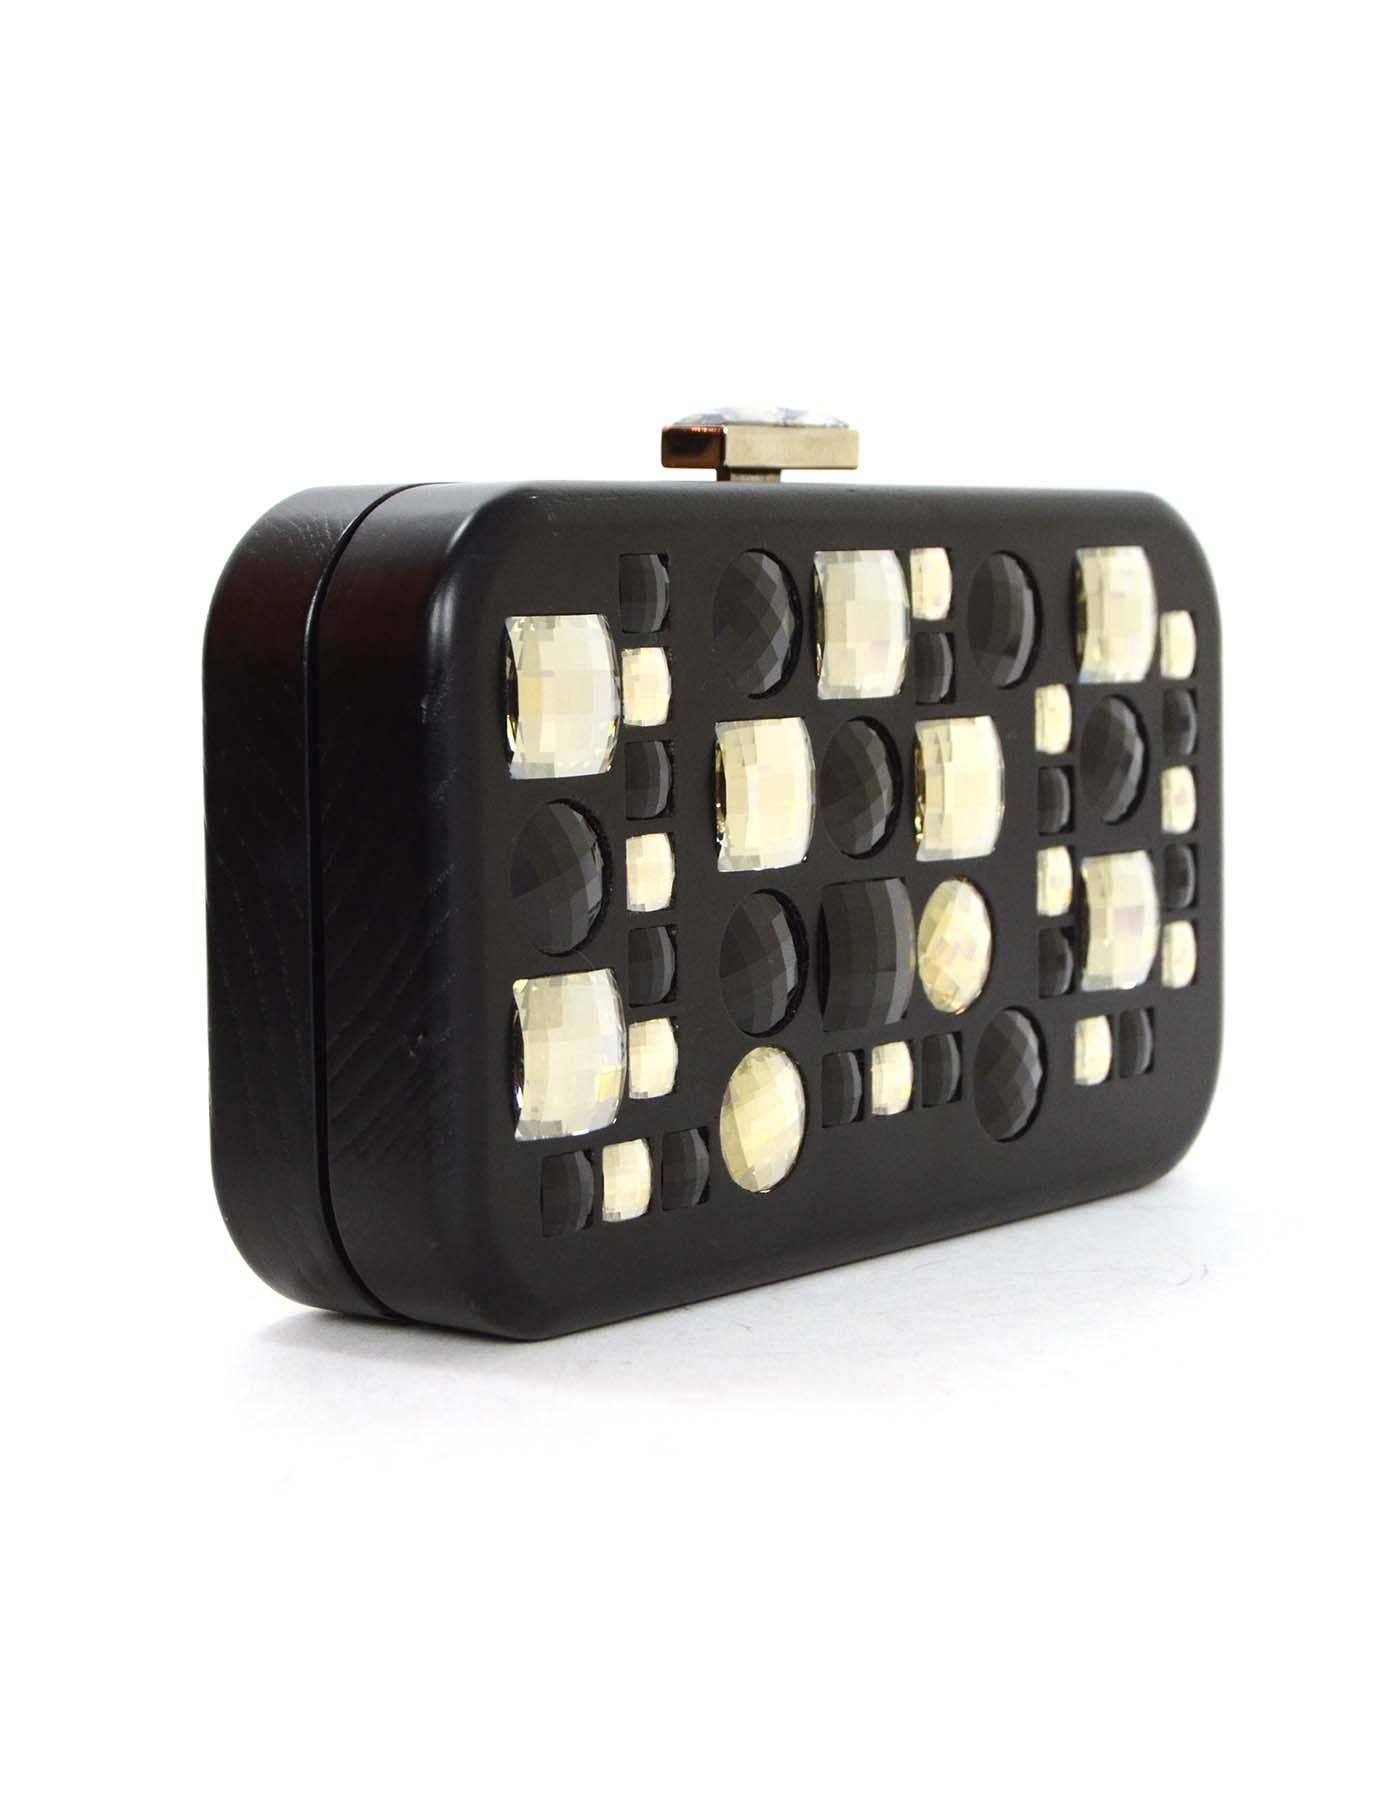 Devi Kroell Black Jeweled Hard Case Clutch 
Features large square and circular jewels on front of clutch
Made In: Italy
Color: Black
Hardware: Silvertone
Materials: Wood and jewels
Lining: Taupe satin
Closure/Opening: Hinge opening with push